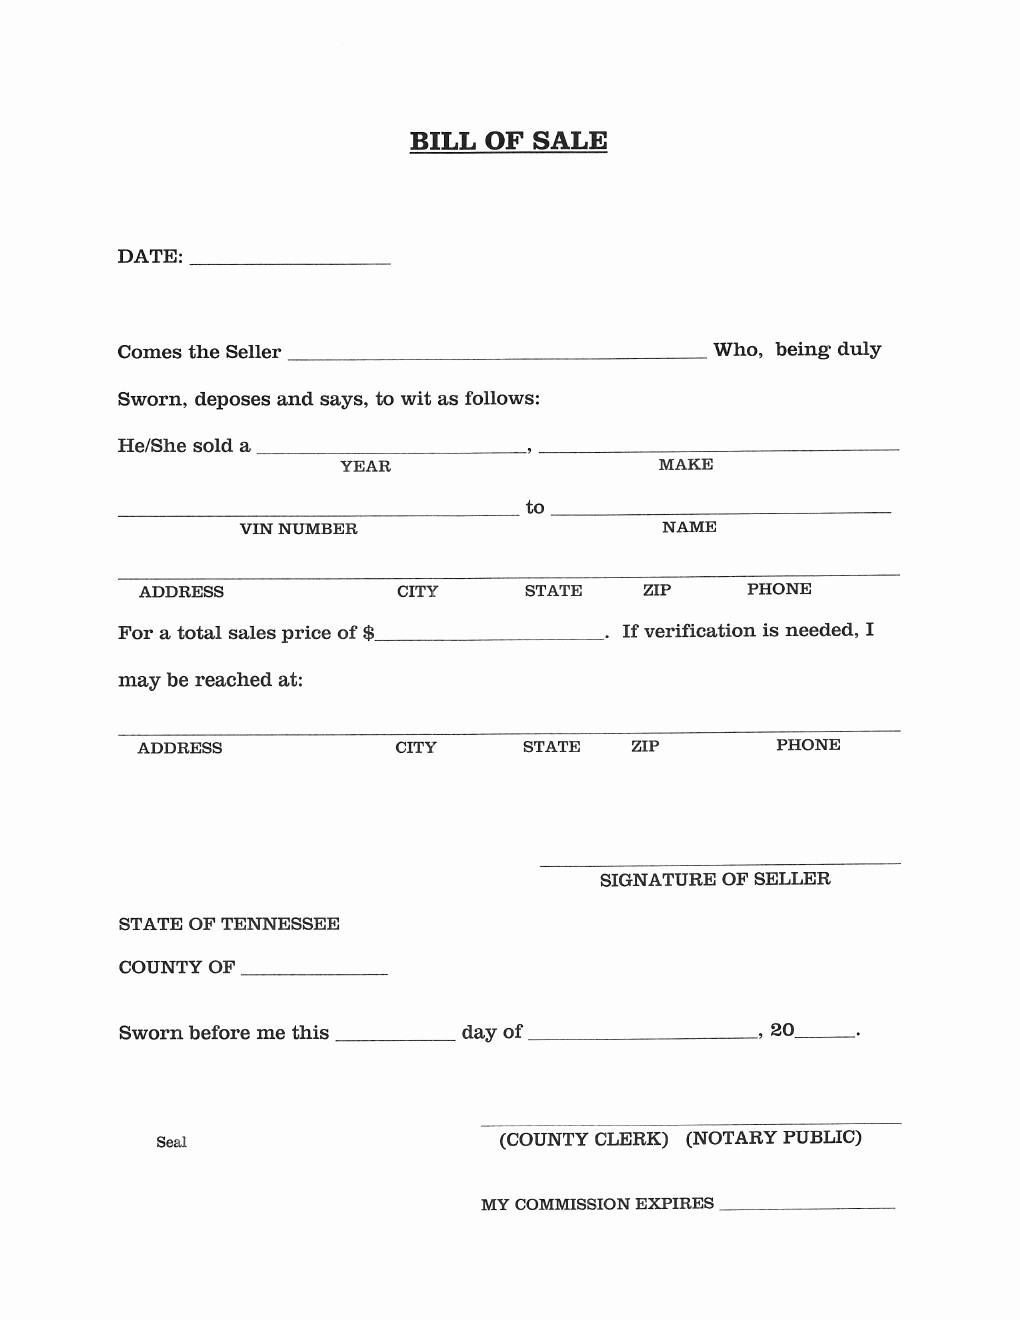 Bill Of Sale Free form Unique Free Tennessee Vehicle Bill Of Sale form Download Pdf